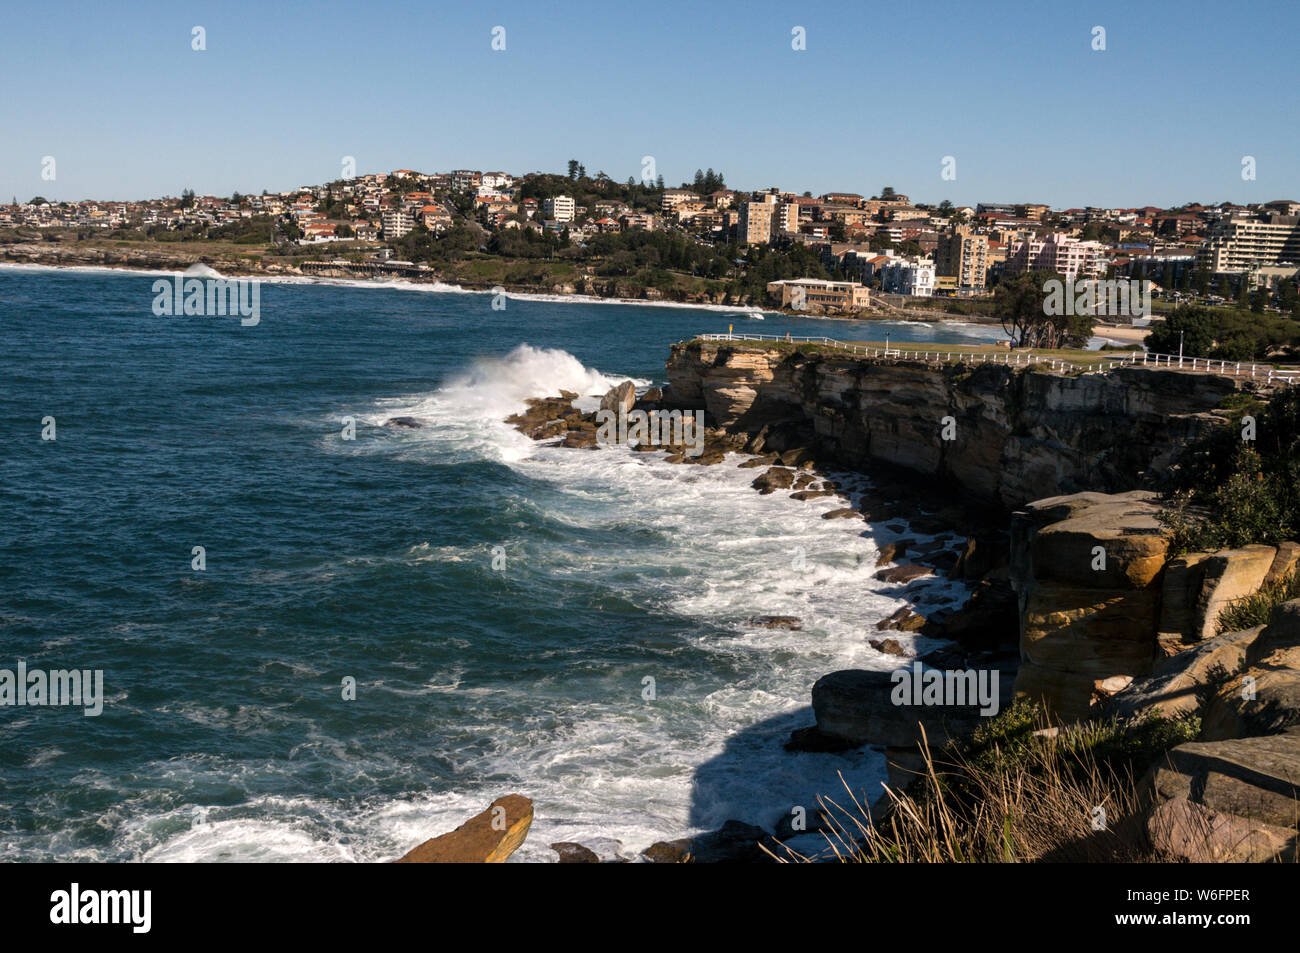 High waves smash onto rocks along the coast at Dolphins Point near Coogee in New South Wales, Australia   Coogee beach  is a wide circular sandy bay, Stock Photo